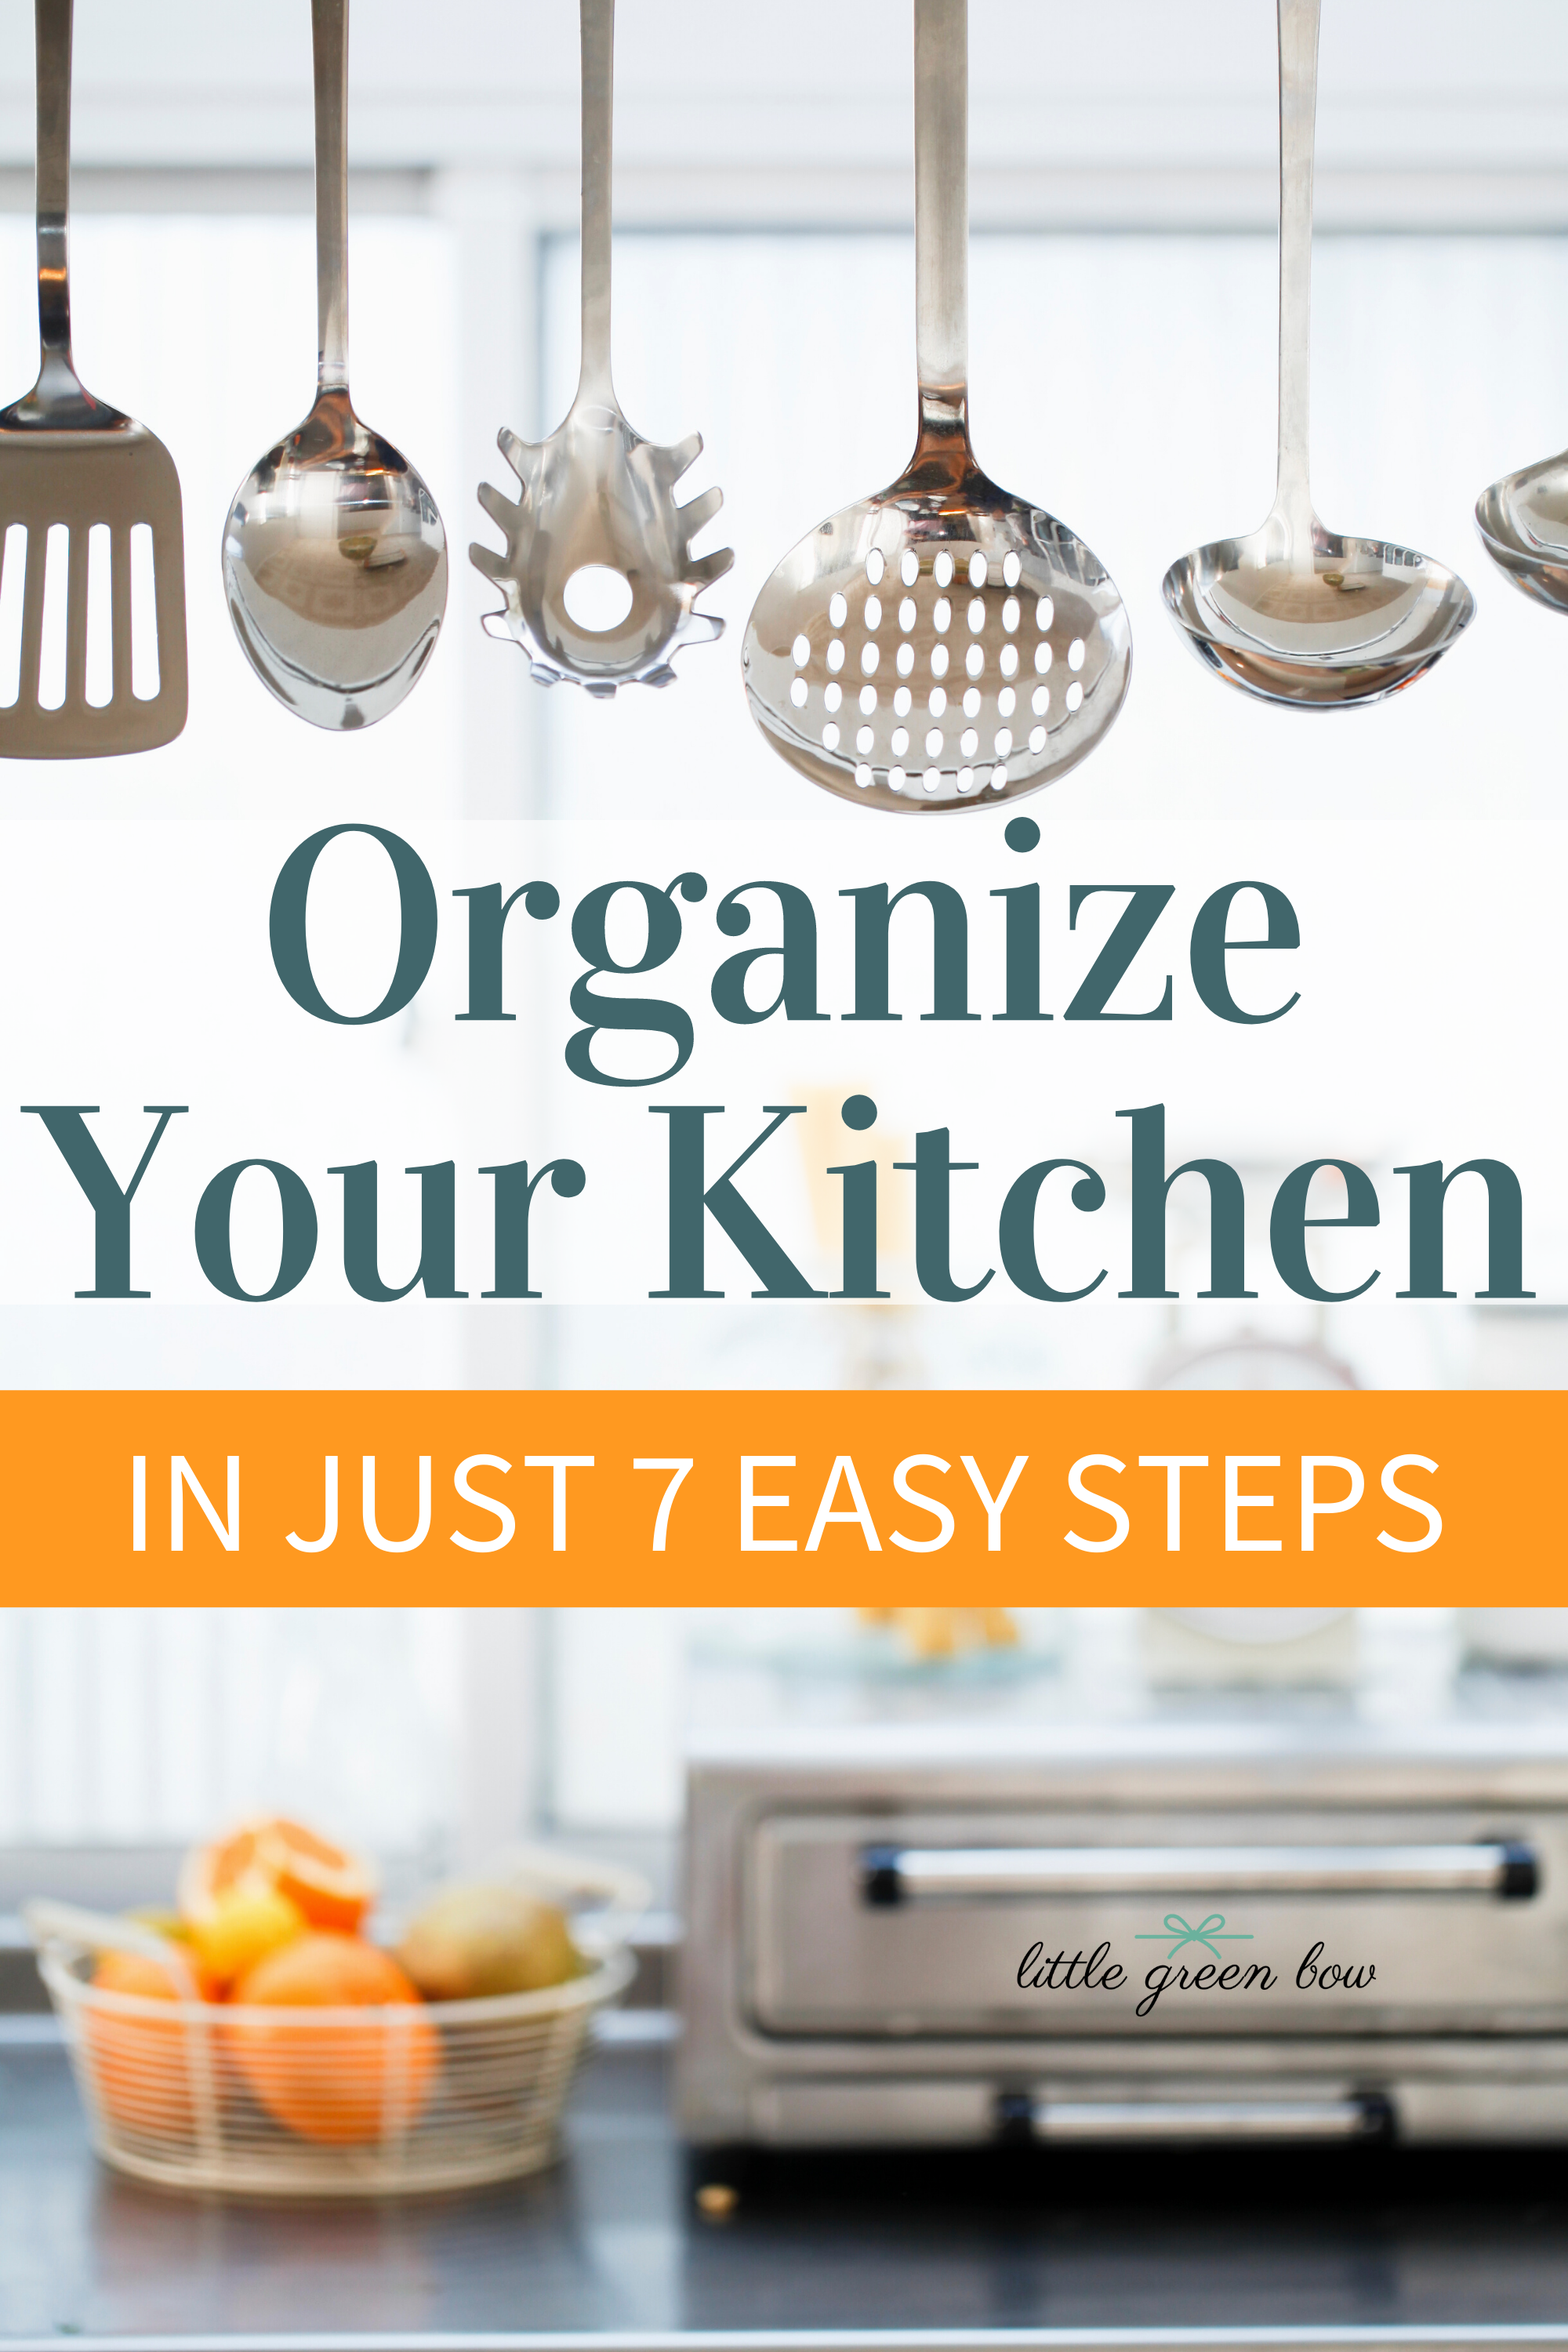 Organize Your Kitchen in Just 7 Easy Steps